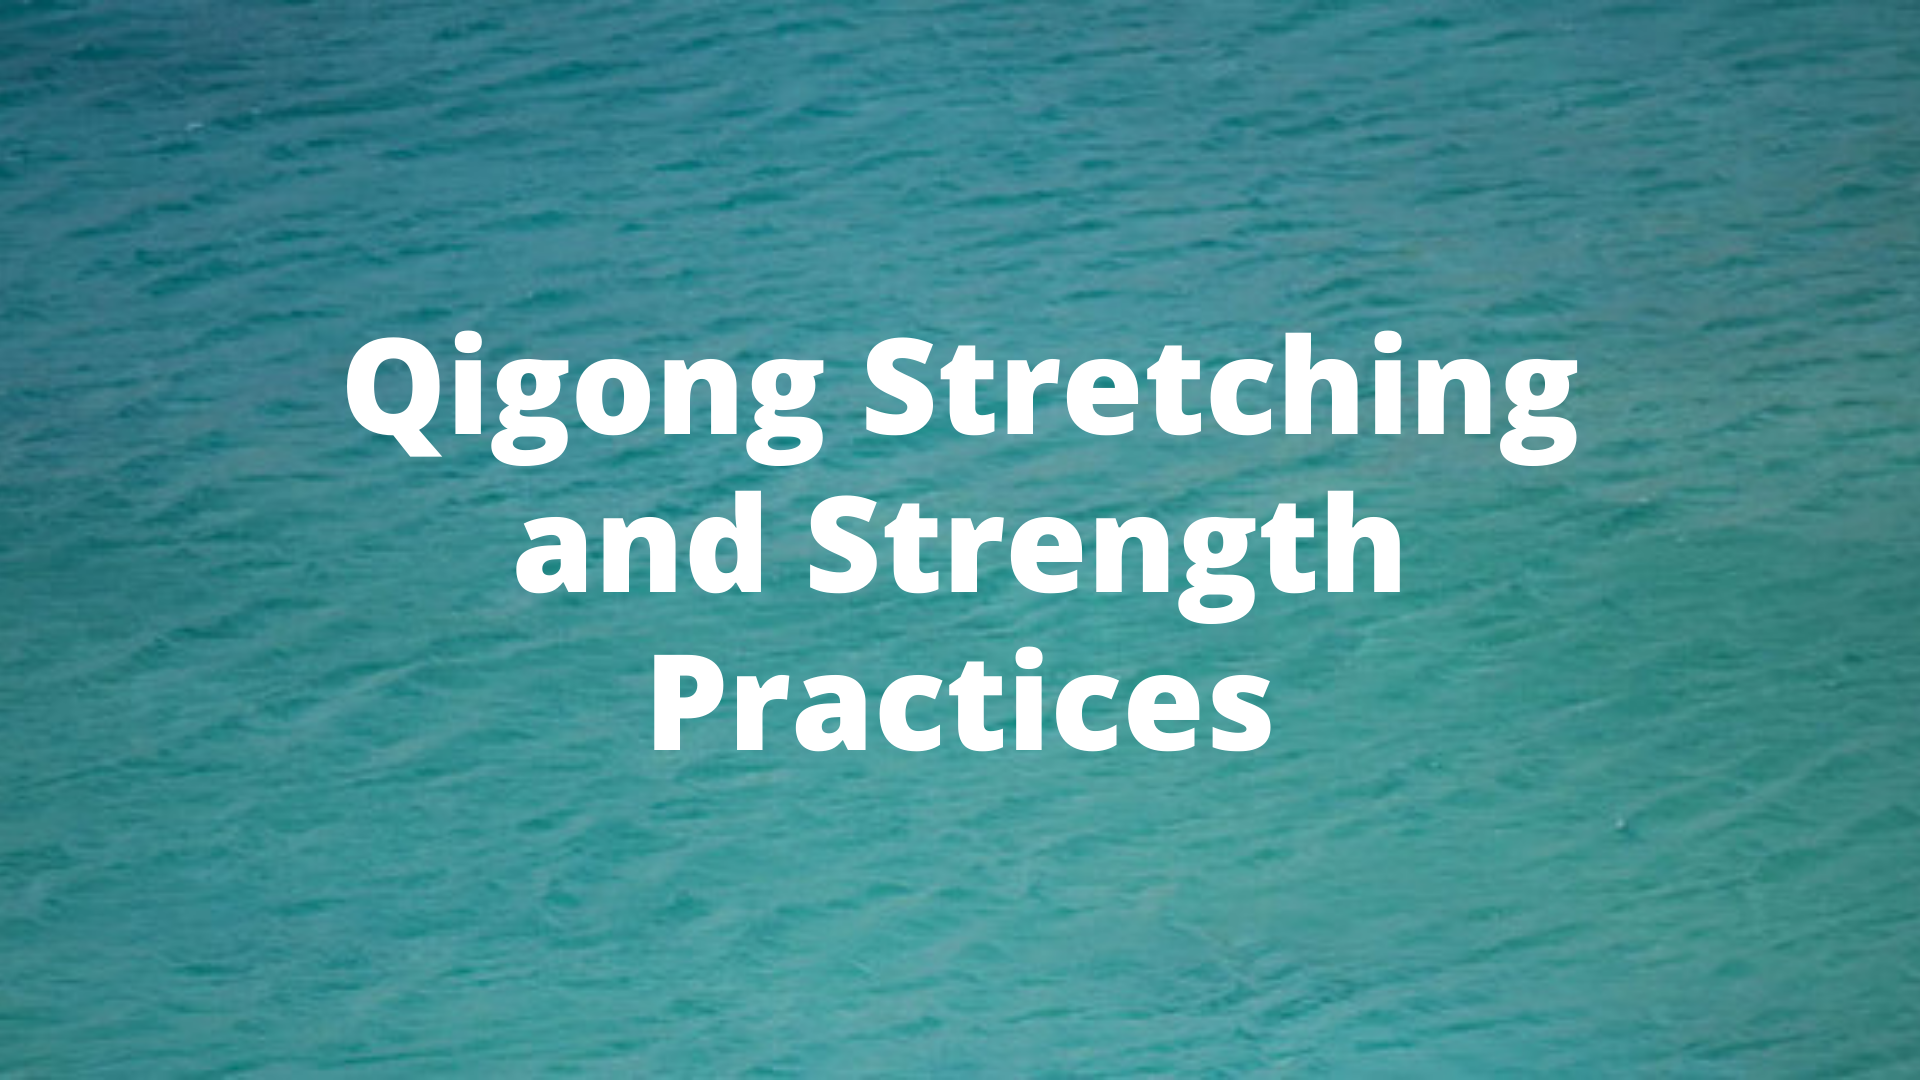 Qigong Stretching and Strength Practices